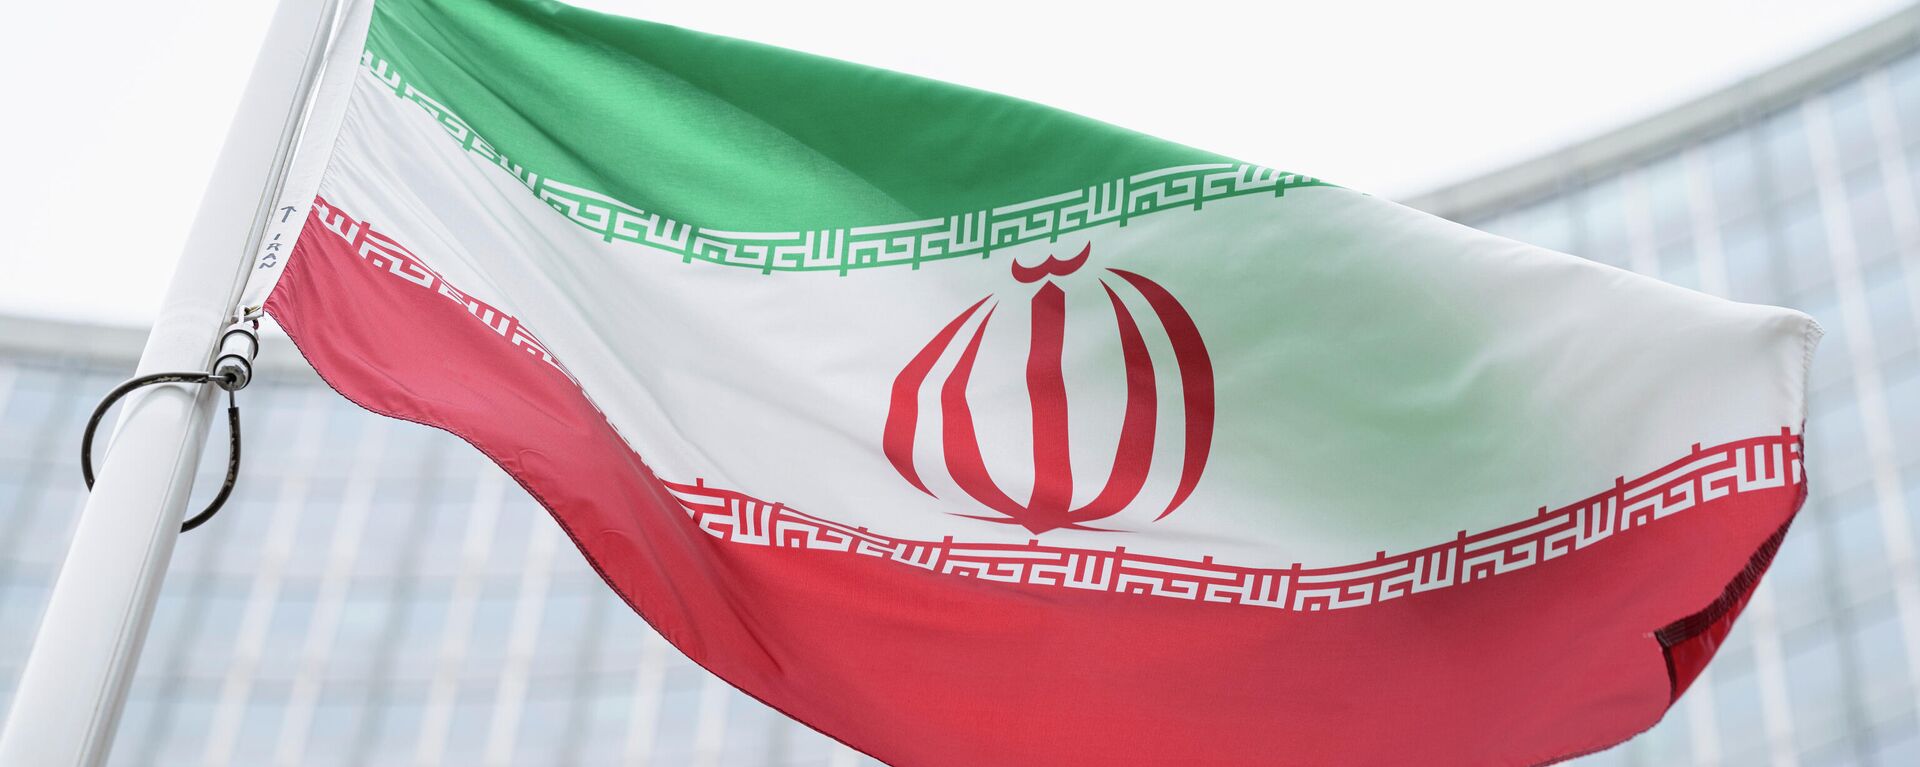 FILE - The flag of Iran waves in front of the the International Center building with the headquarters of the International Atomic Energy Agency, IAEA, in Vienna, AustriaI, May 24, 2021. On Monday, Nov. 29, 2021, negotiators are gathering in Vienna to resume efforts to revive Iran's 2015 nuclear deal with world powers, with hopes of quick progress muted after the arrival of a hard-line new government in Tehran led to a more than five-month hiatus. (AP Photo/Florian Schroetter, FILE) - Sputnik International, 1920, 10.09.2022